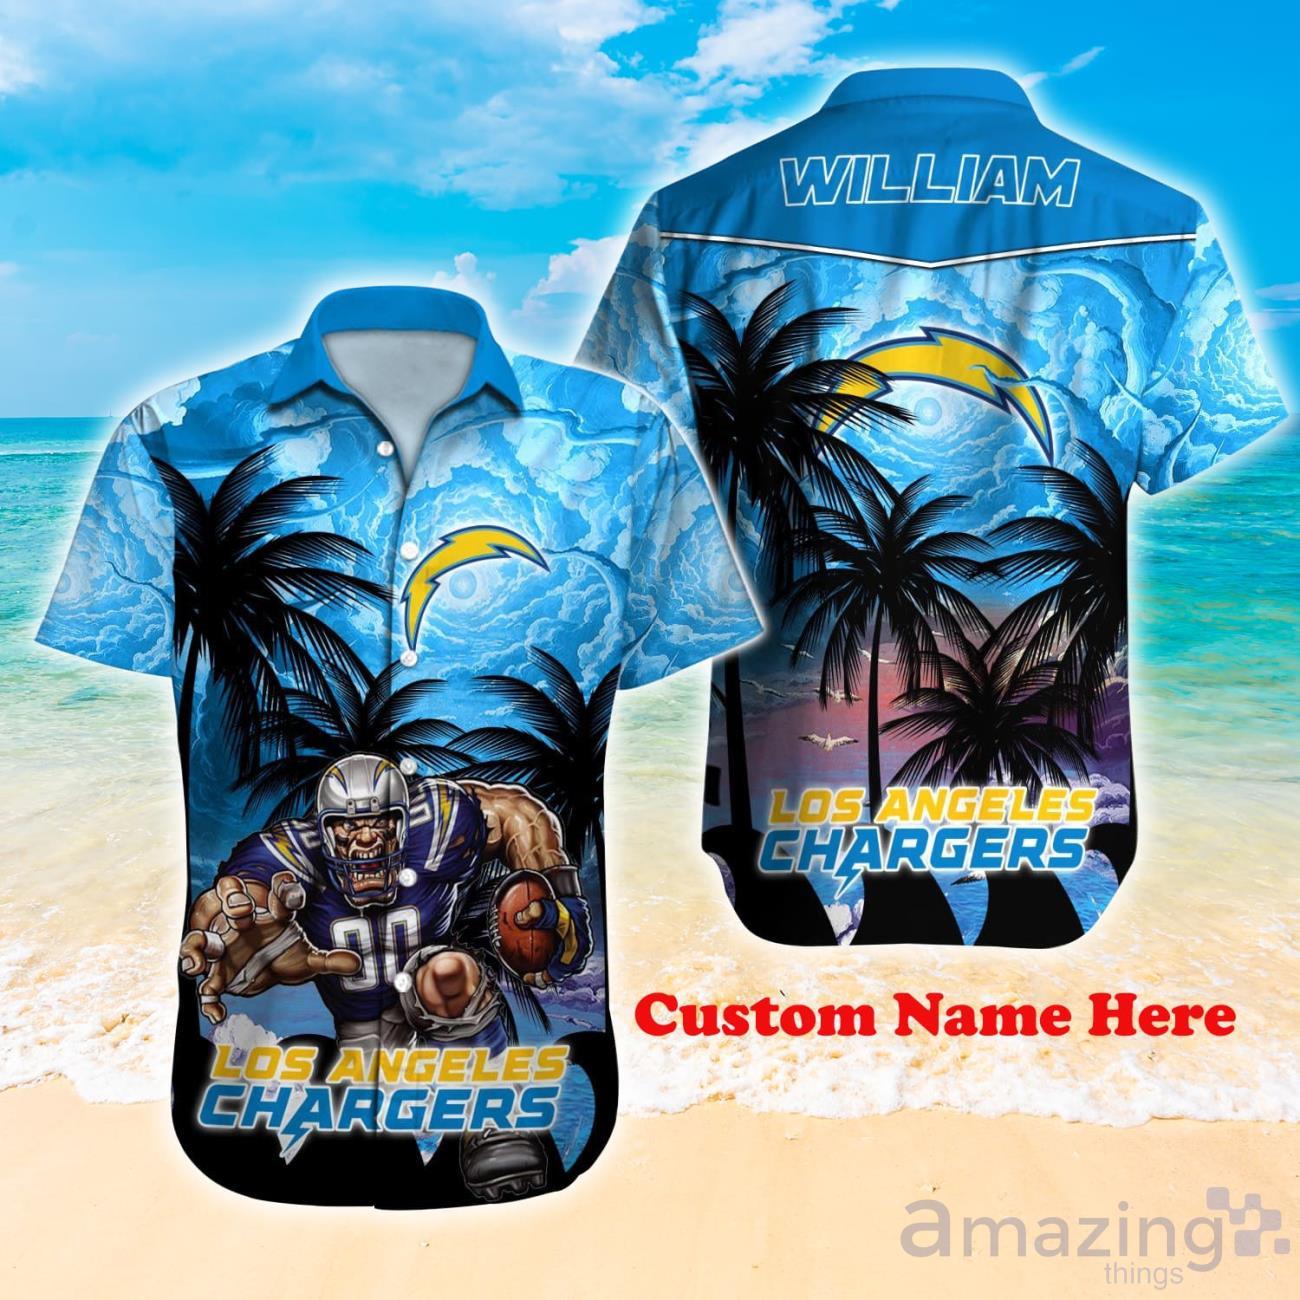 Los Angeles Chargers NFL Custom Name Hawaiin Shirt Best Design For Fans